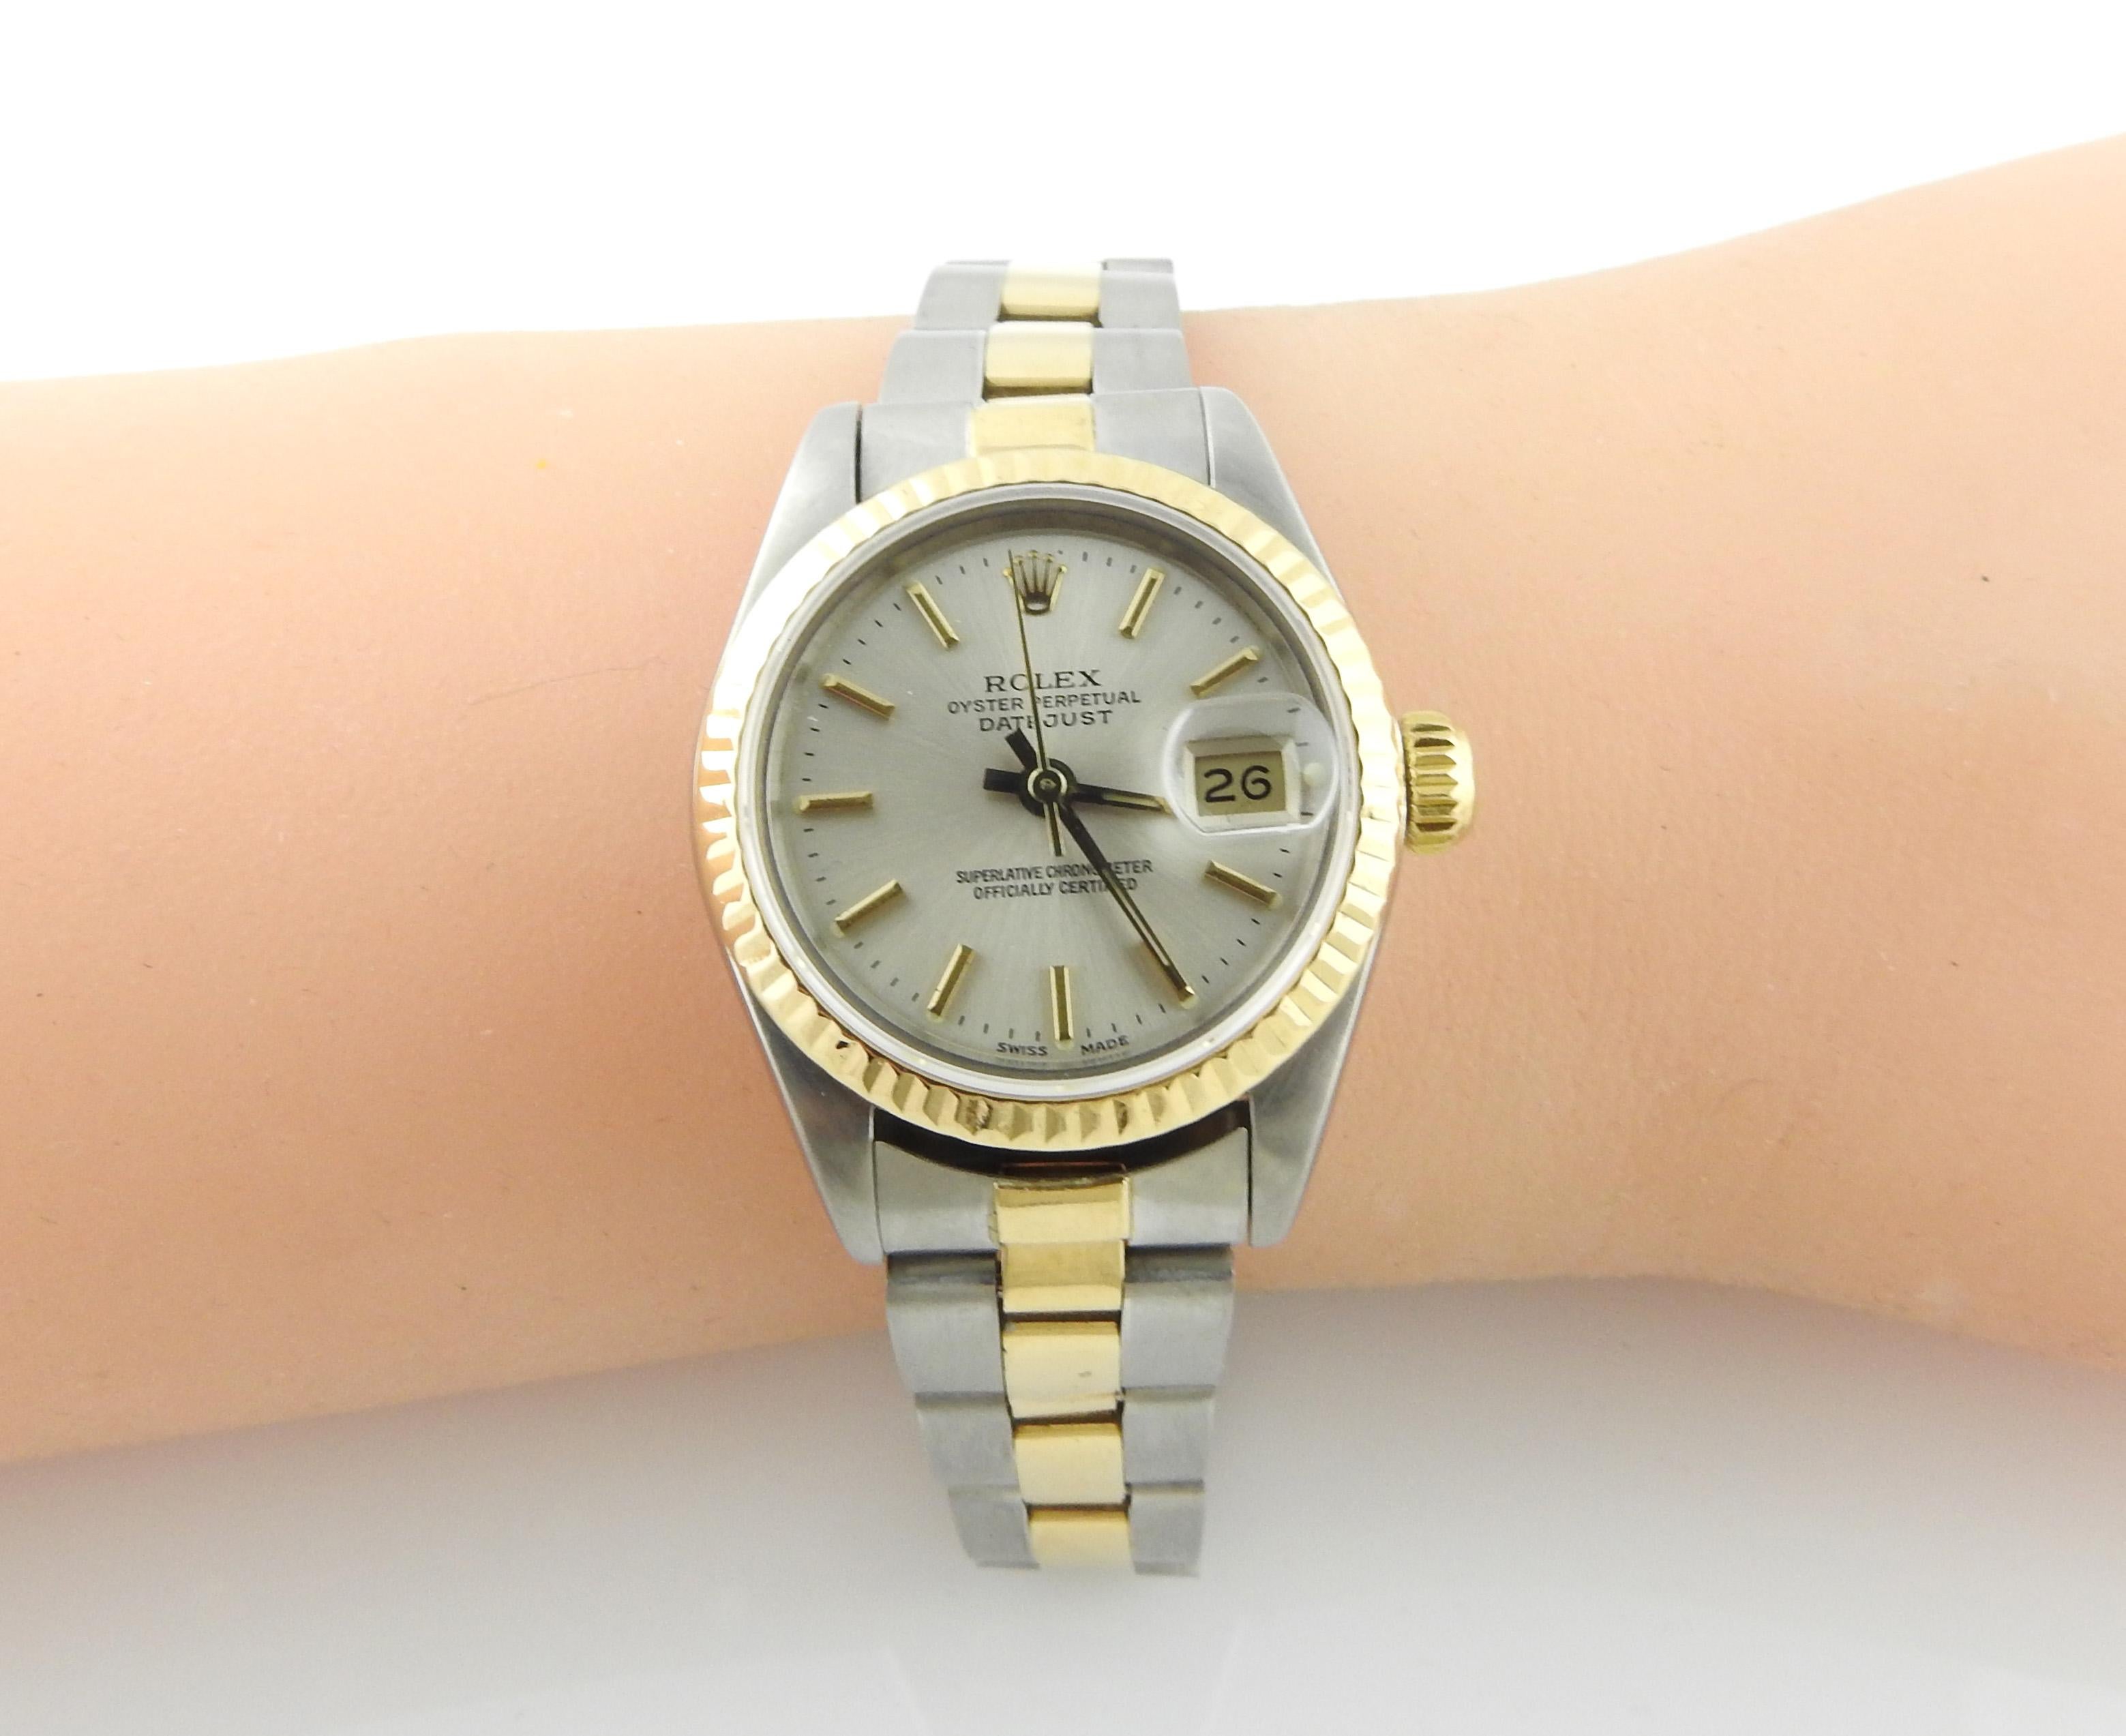 1990 Rolex Ladies Datejust Tow Tone Watch Silver Dial 69173 Box, Papers, Tag 5